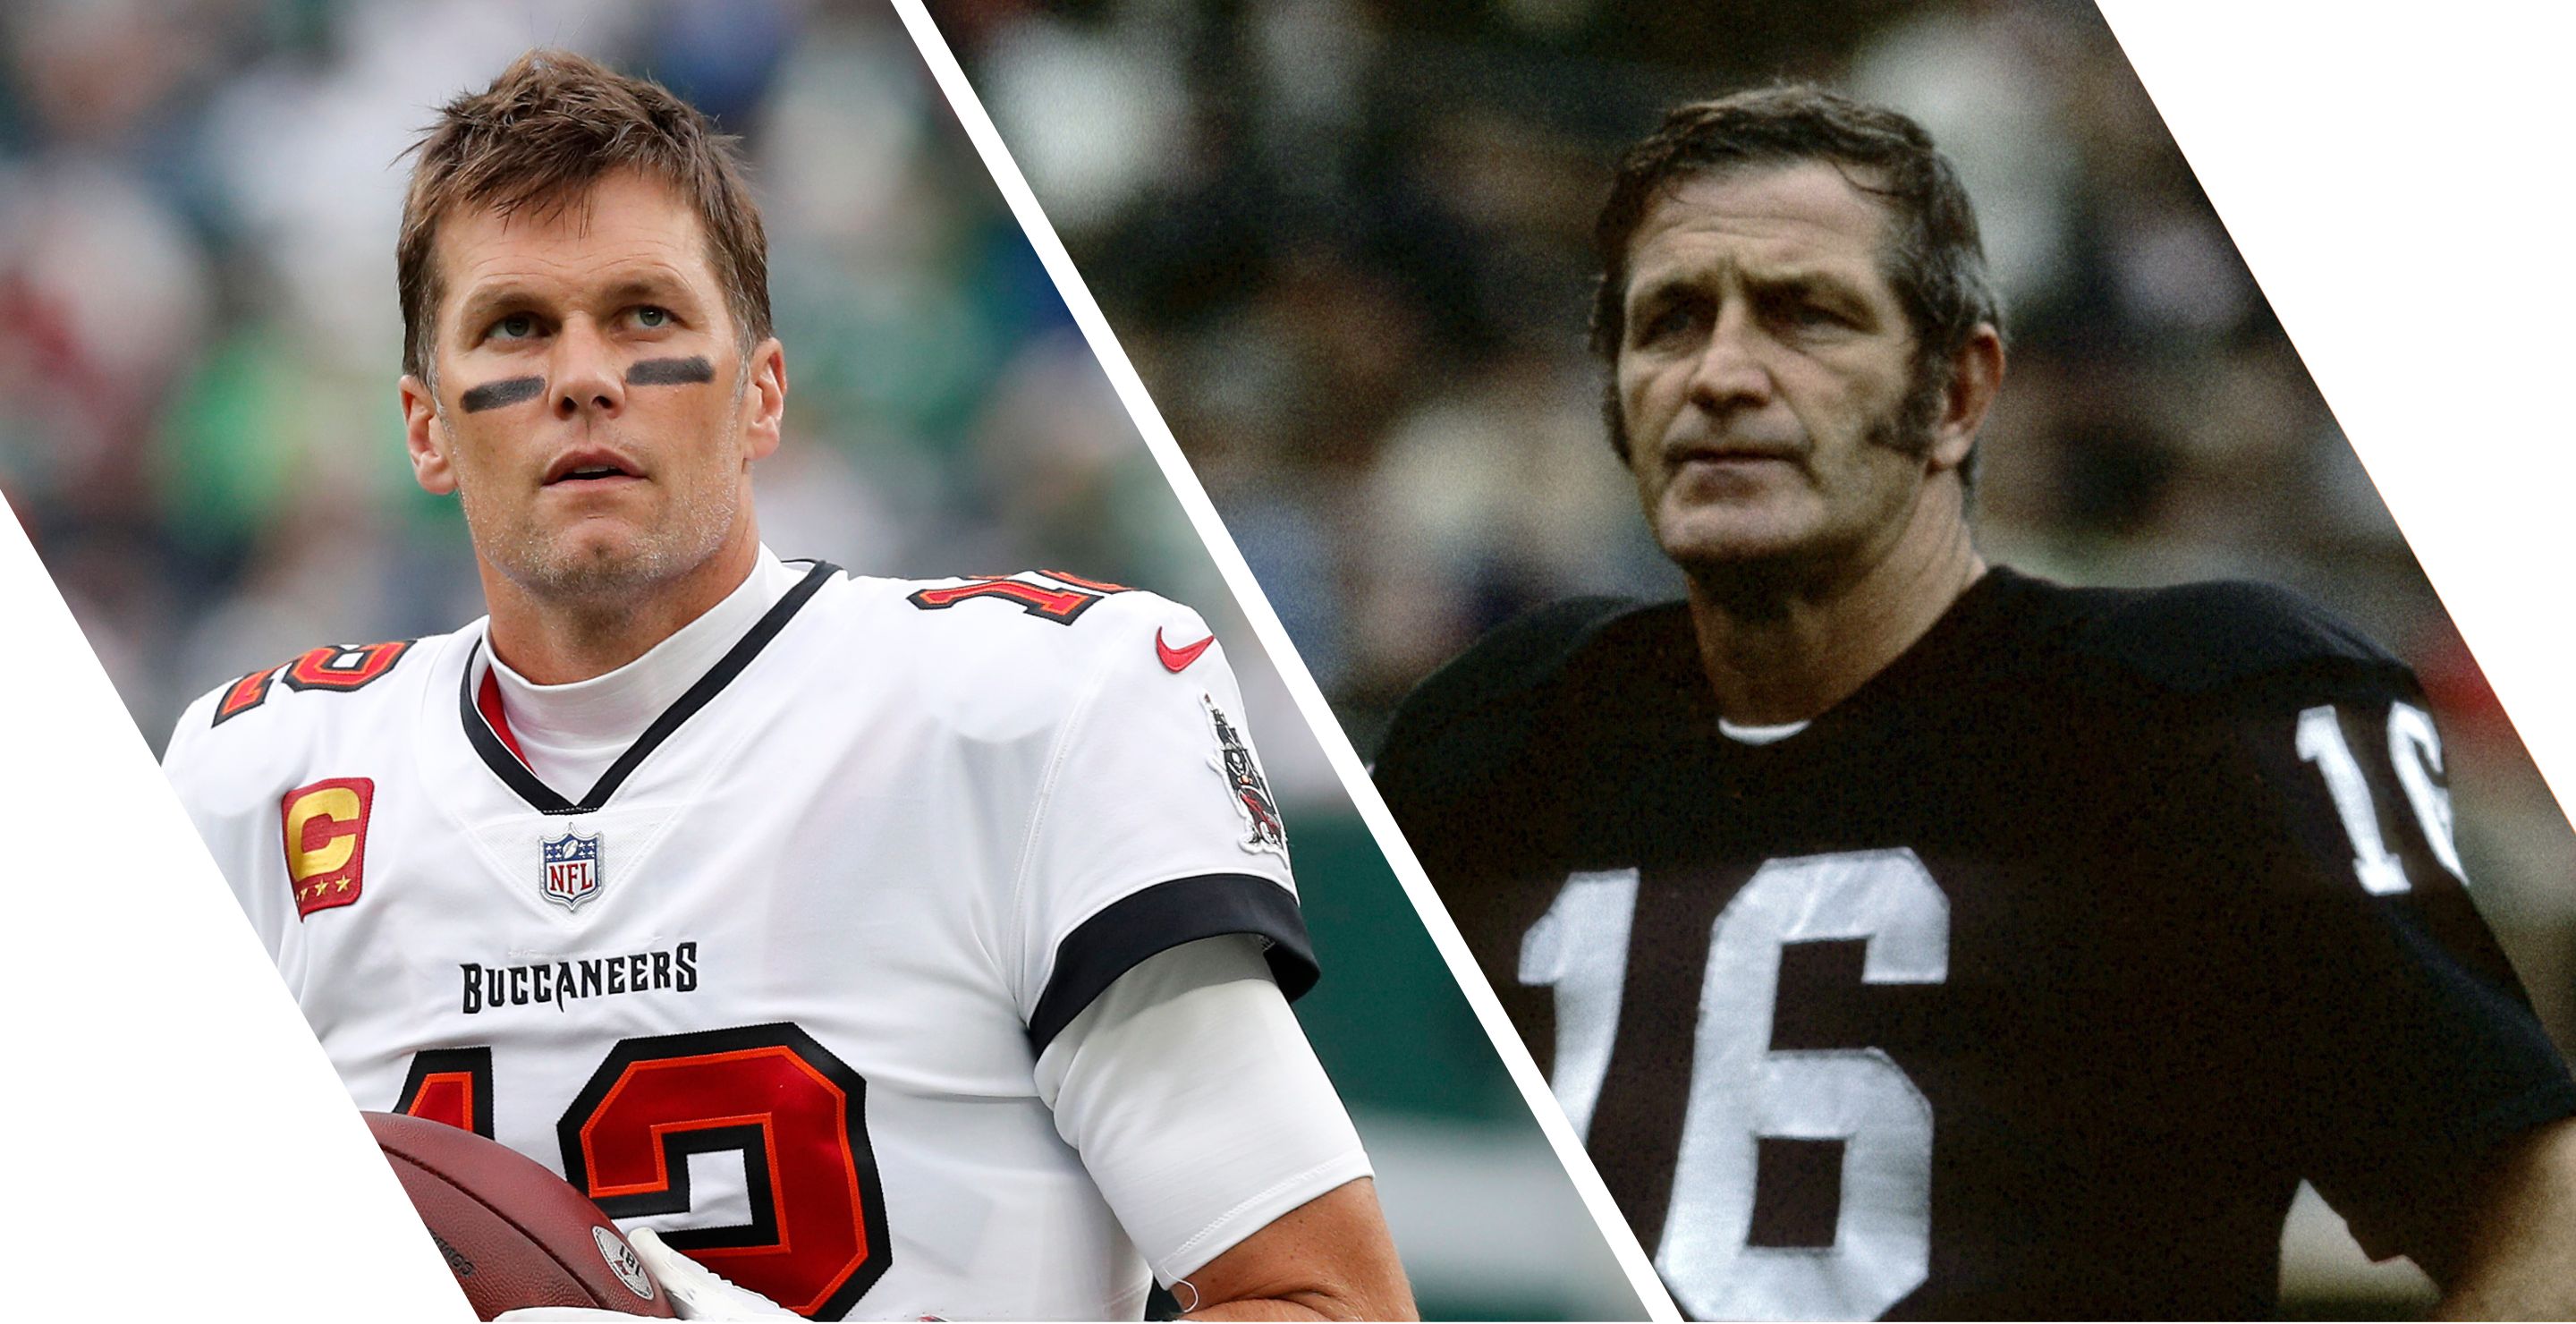 The 11 Oldest NFL Players to Ever Take the Field